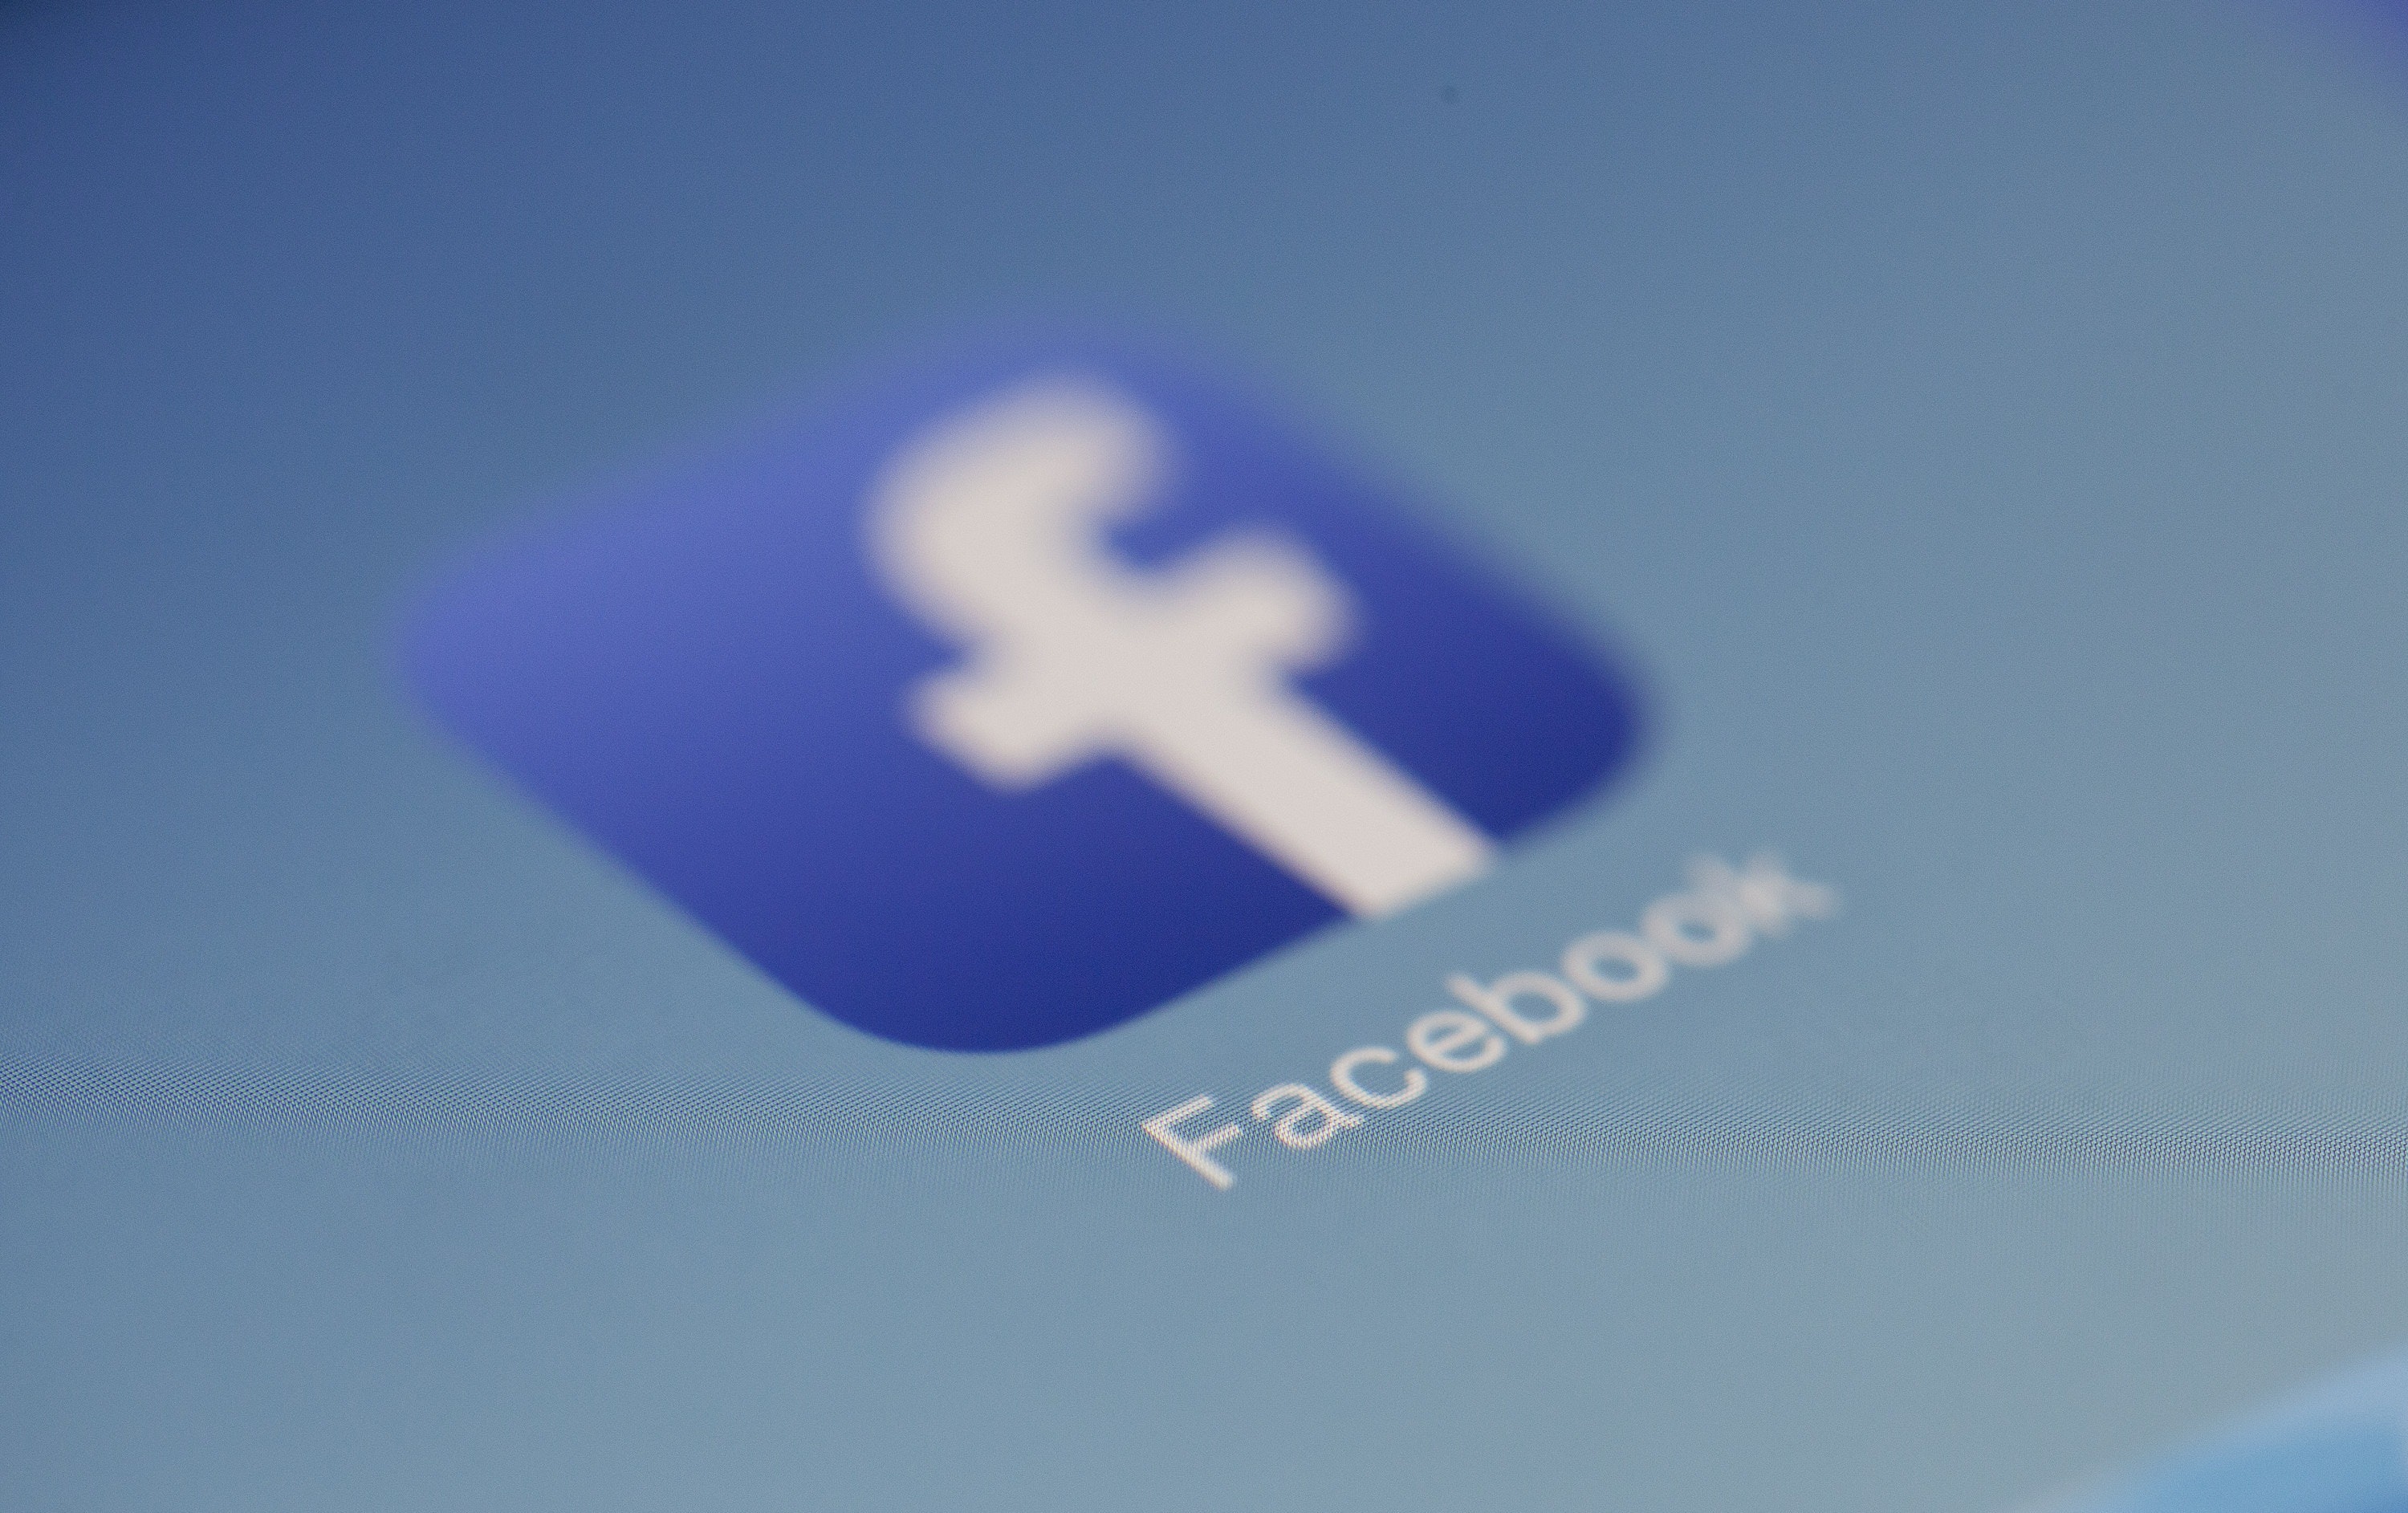 European regulators are cracking down on Facebook and Meta over data privacy concerns